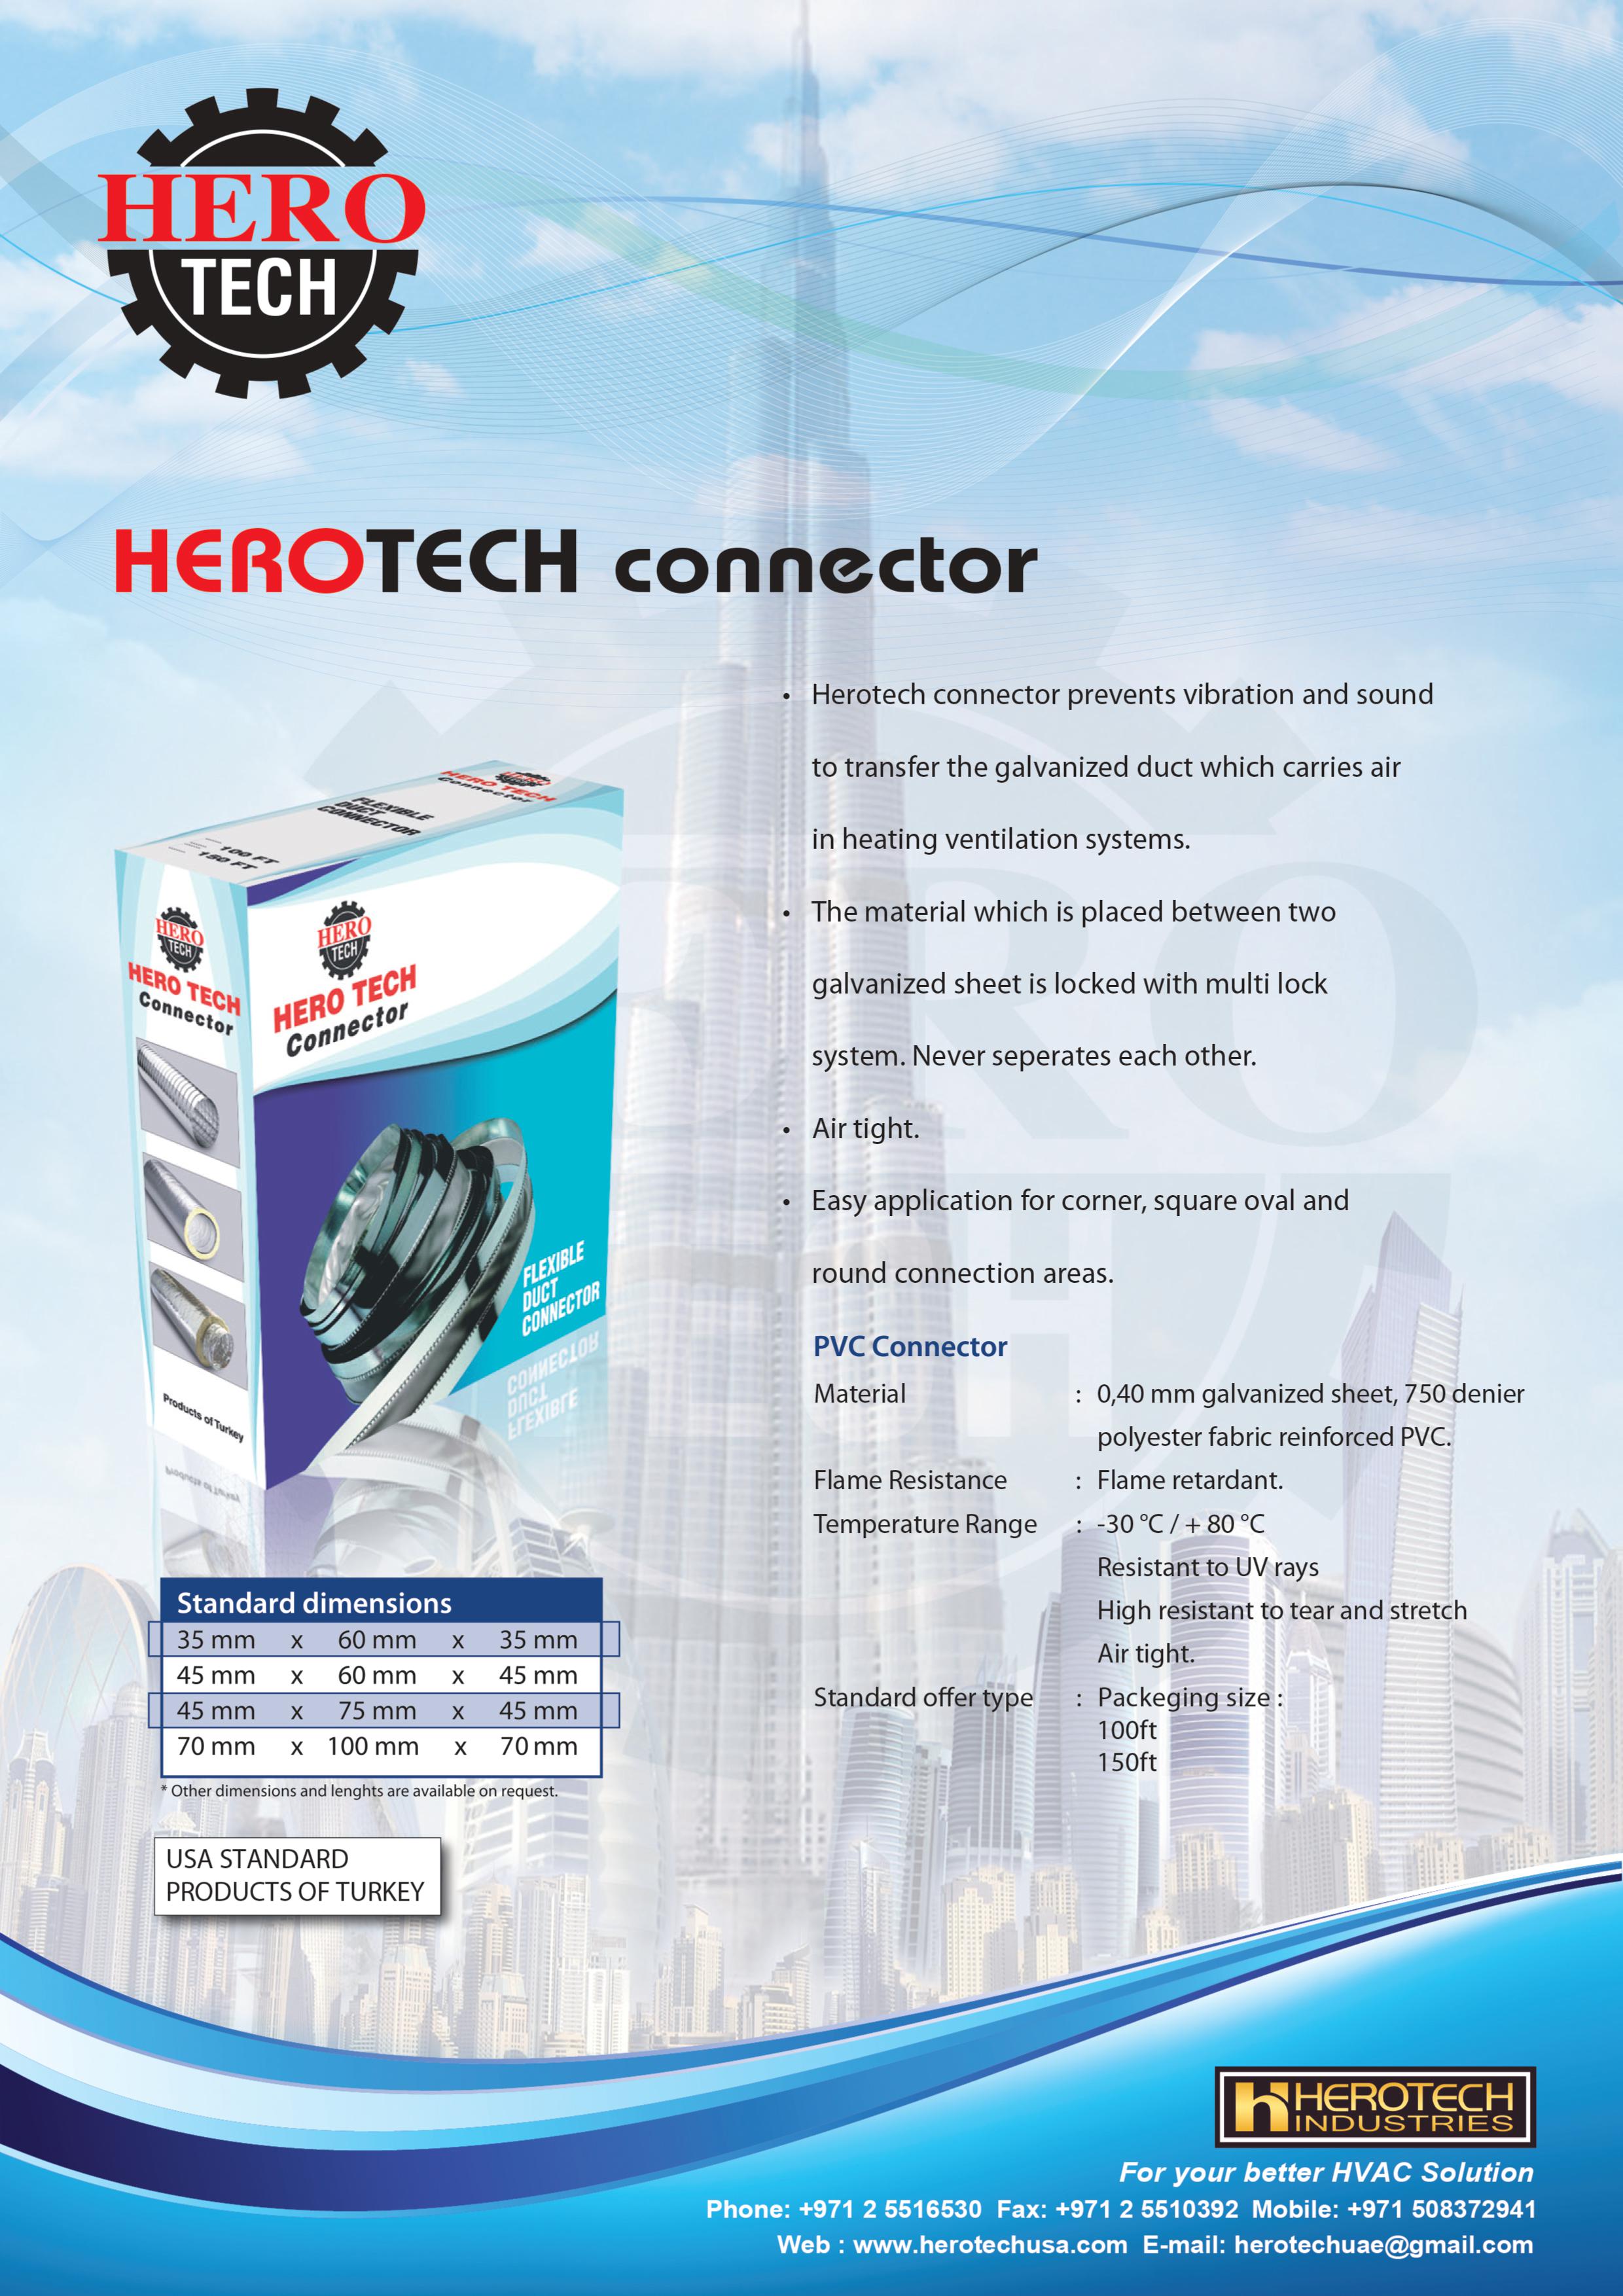 HEROTECH DUCT CONNECTOR